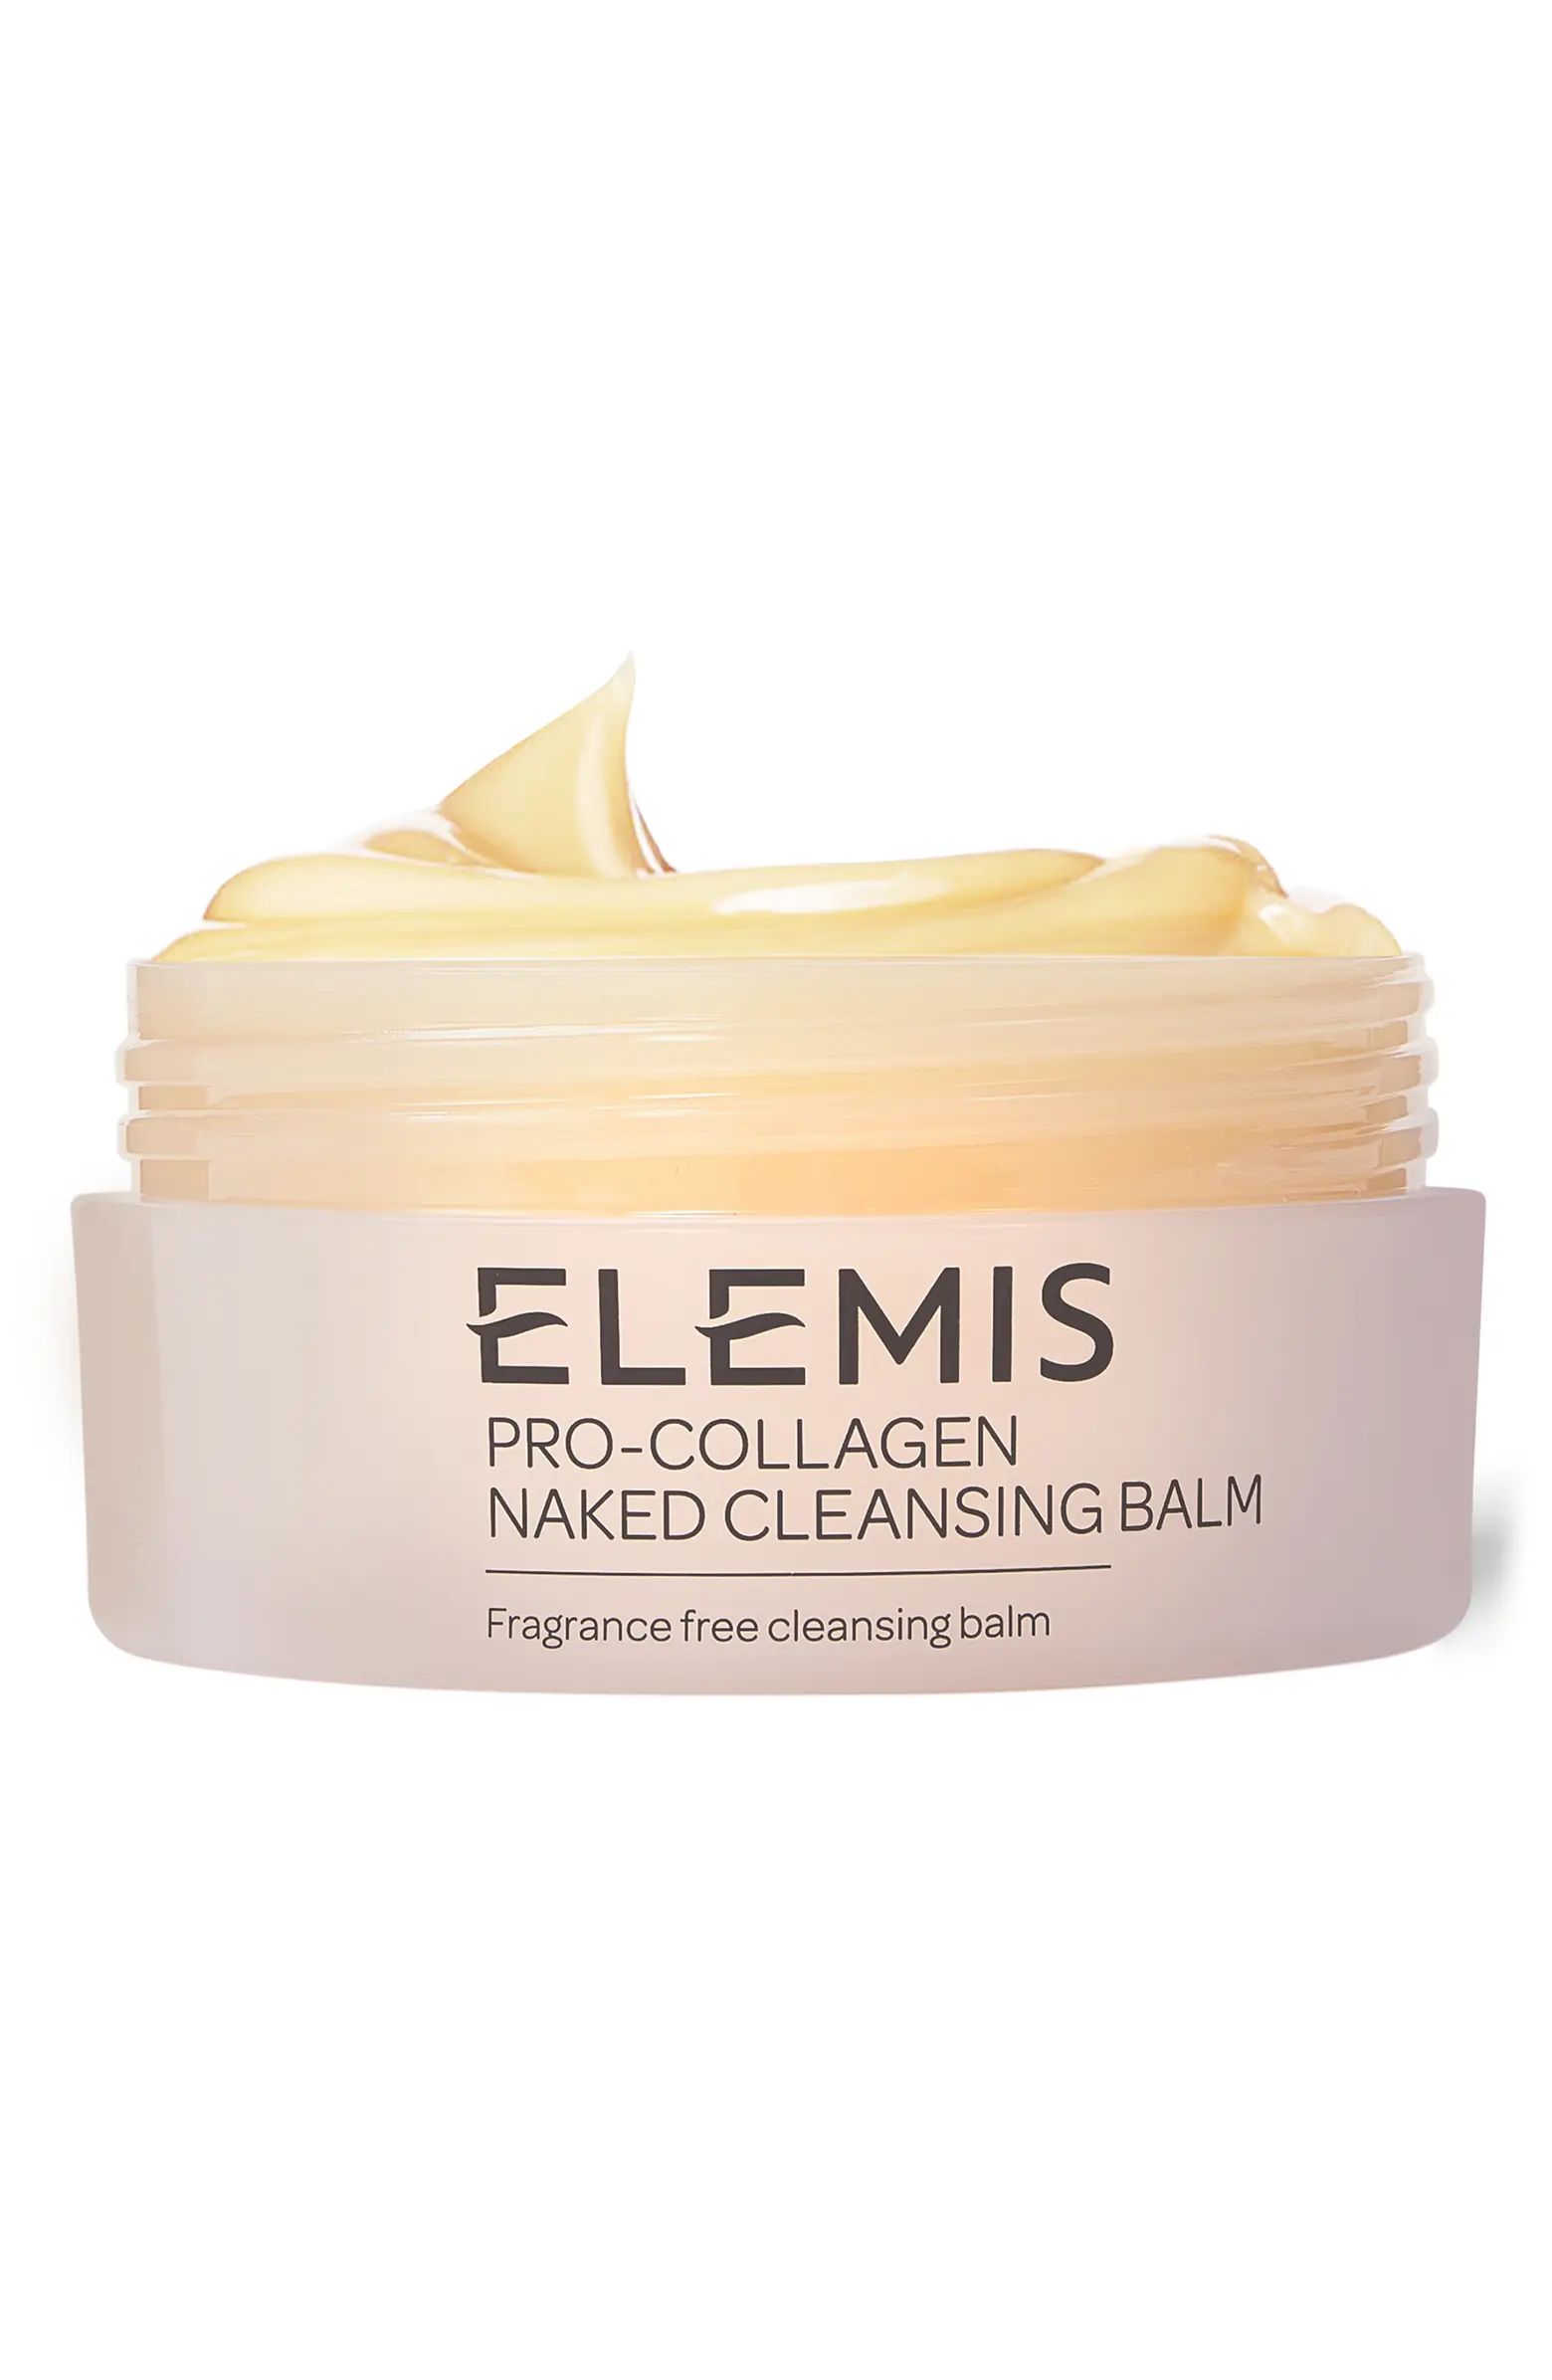 Pro-Collagen Naked Cleansing Balm | Nordstrom